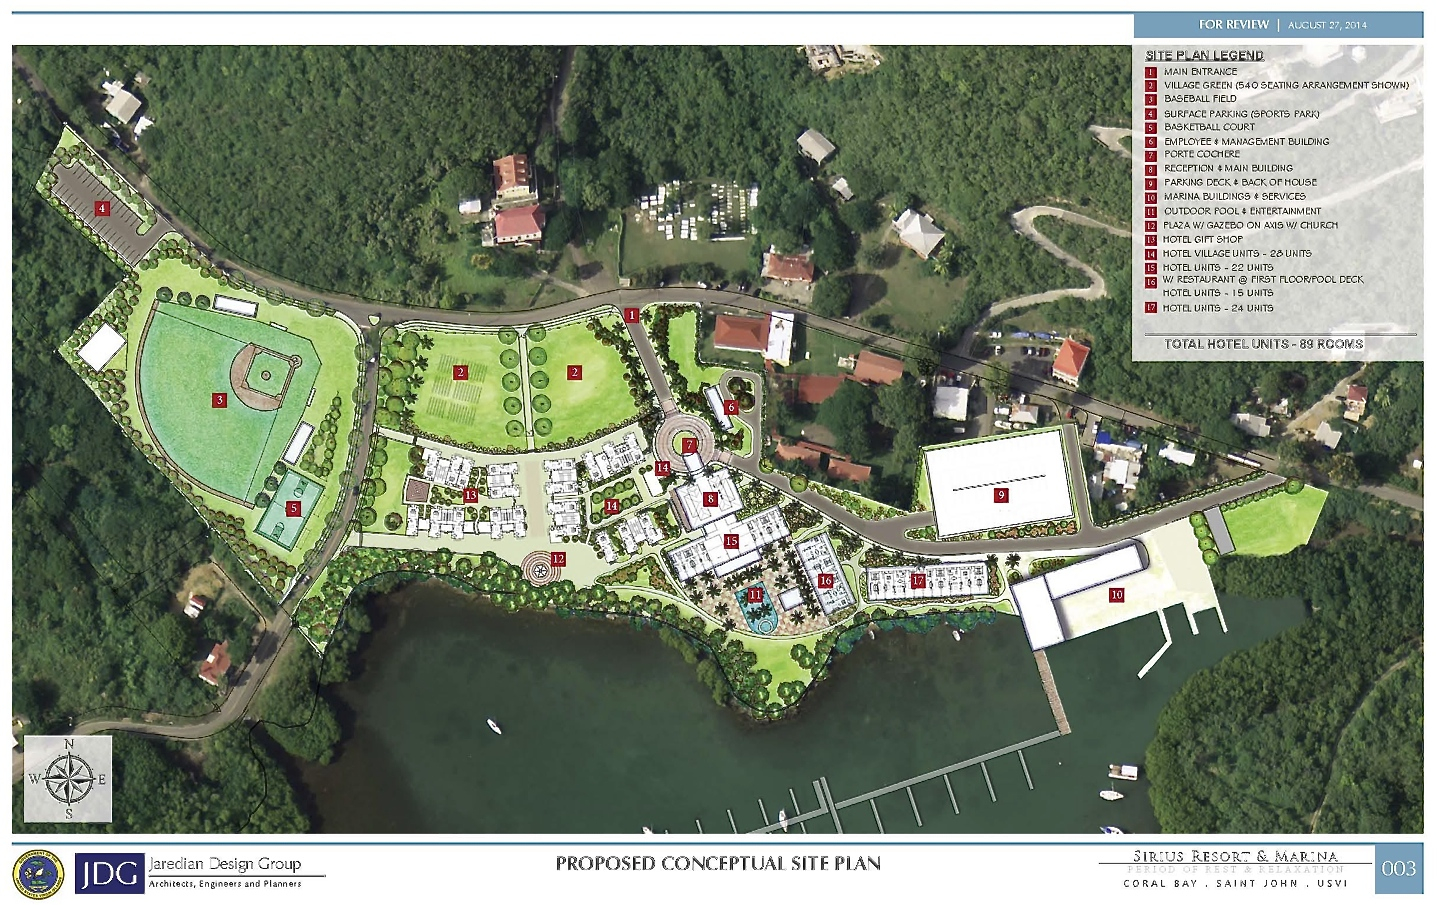 The proposed site plan for the development. For larger view, click on the image.